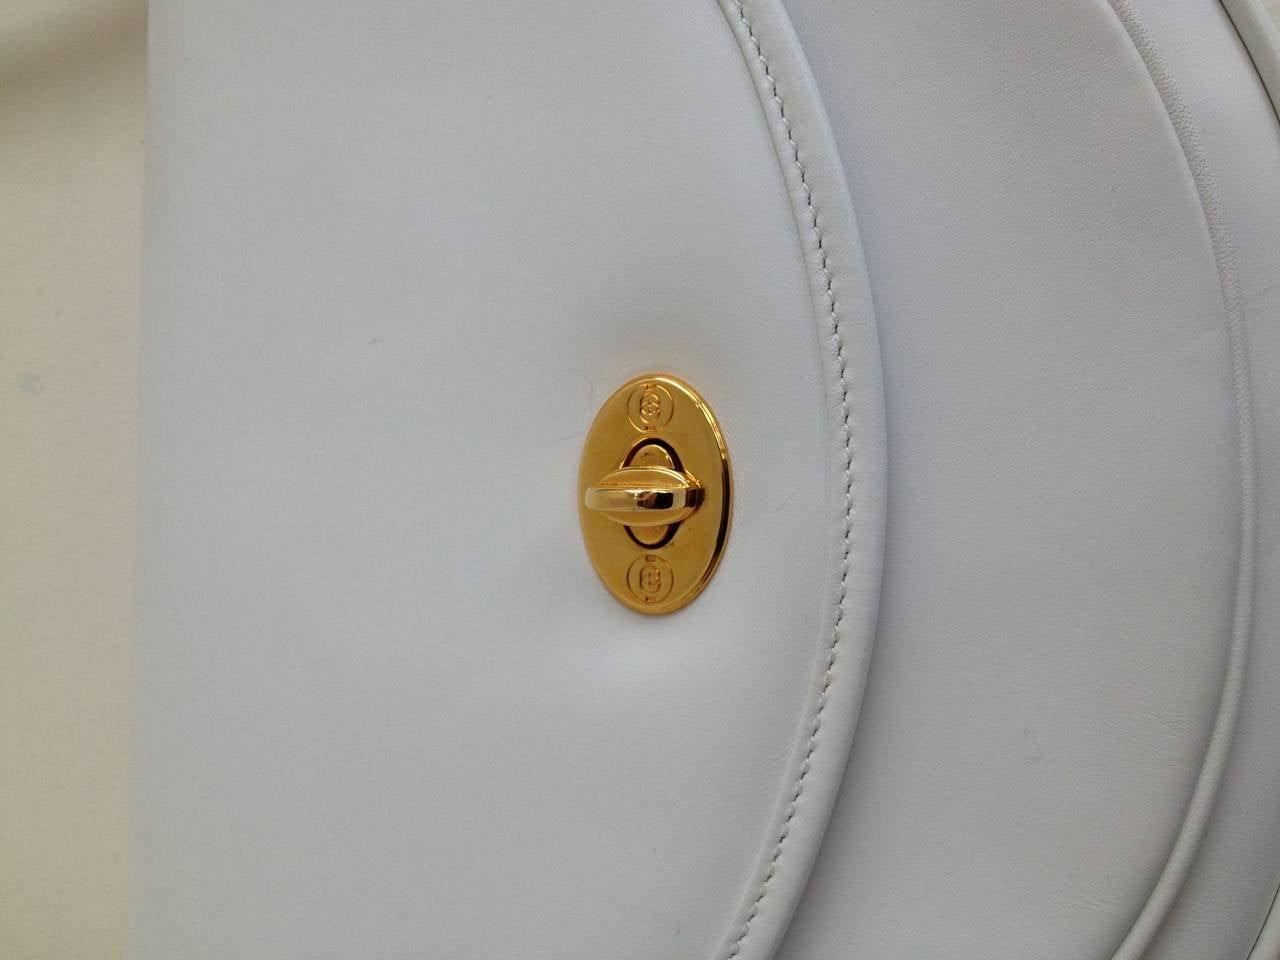 Smooth white leather and glossy gold hardware make this classic Gucci bag extra special. Small and compact with a semi-circular style, it features a long strap that measures 19.5 inches from the top of the bag. The interior is lined in a soft brown